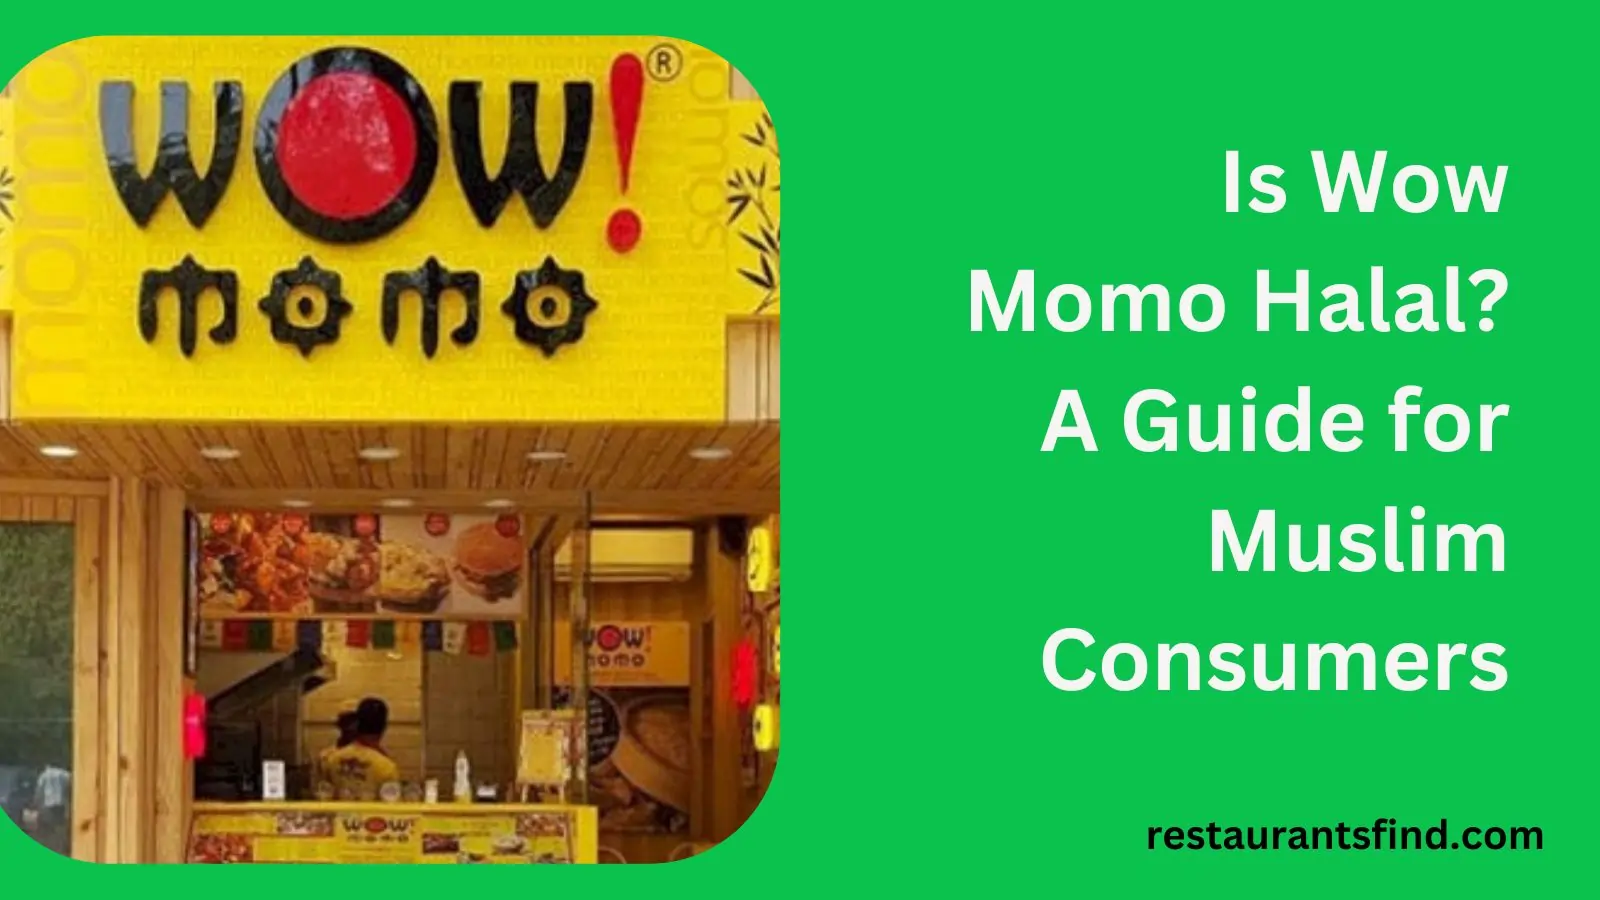 Is Wow Momo Halal? A Guide for Muslim Consumers, Wow Momo is halal